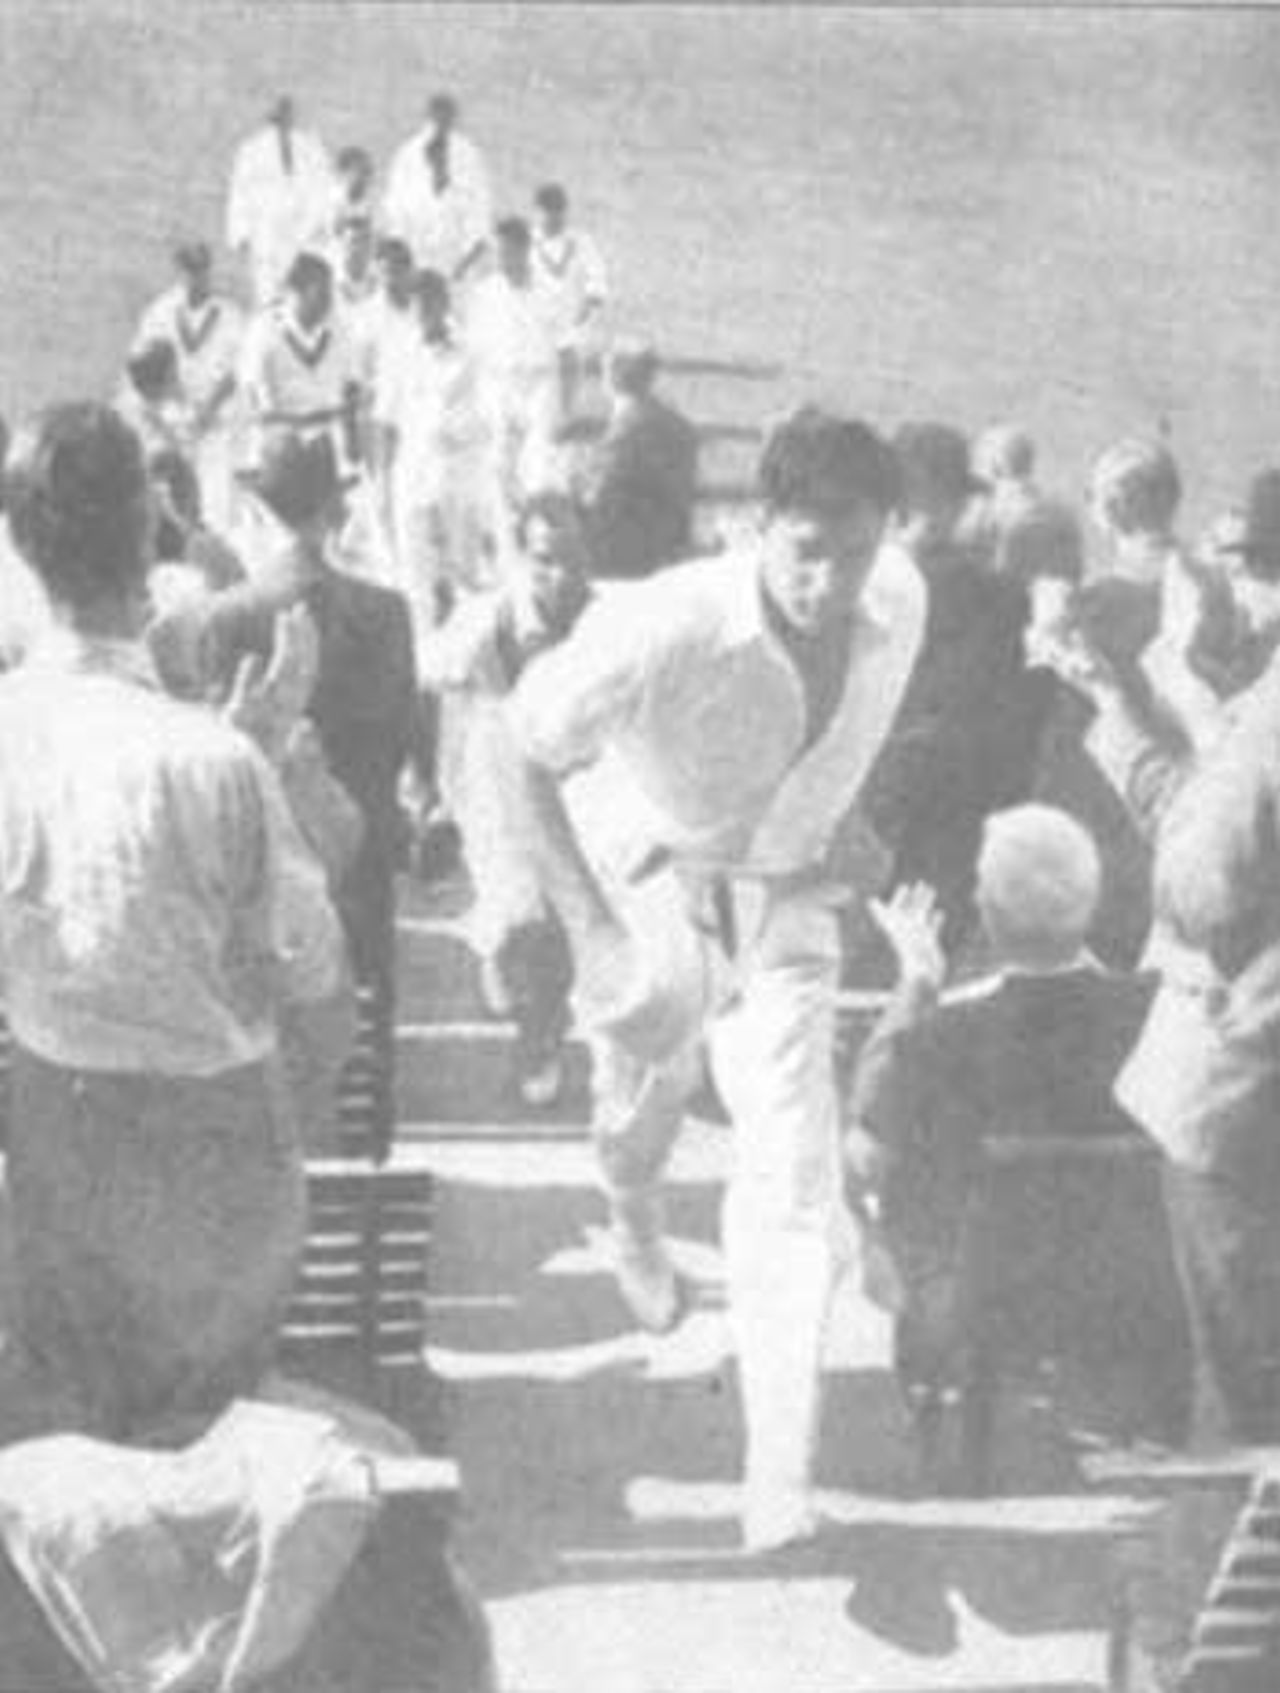 Fazal Mahmood walks to the steps at The Oval following his 12-wicket haul against England